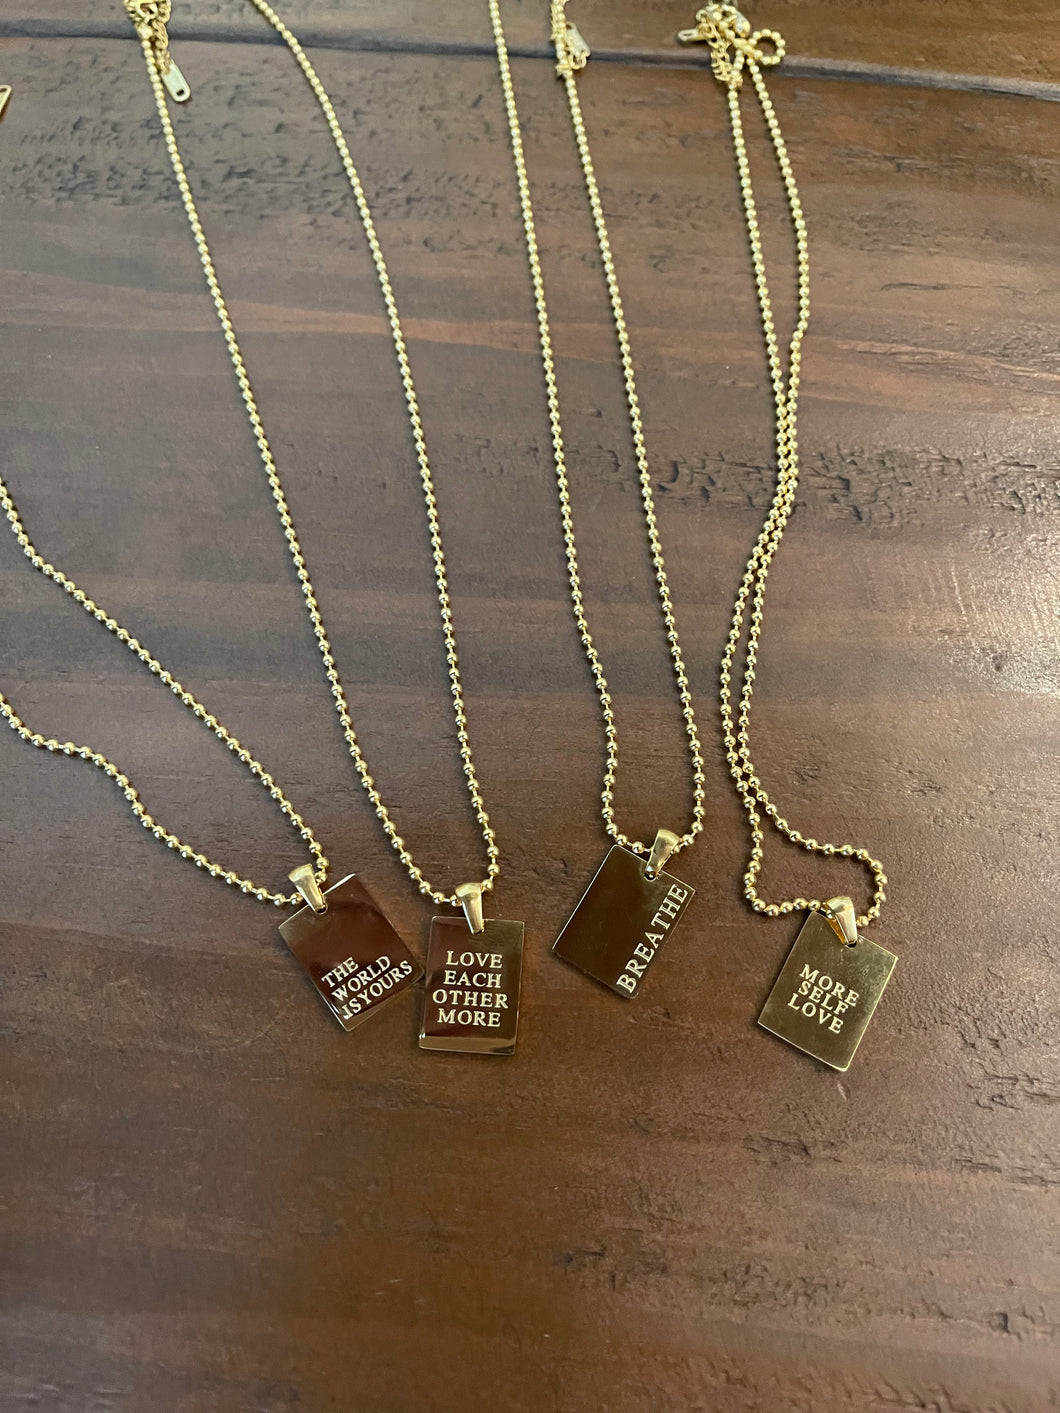 inspiration tag necklaces